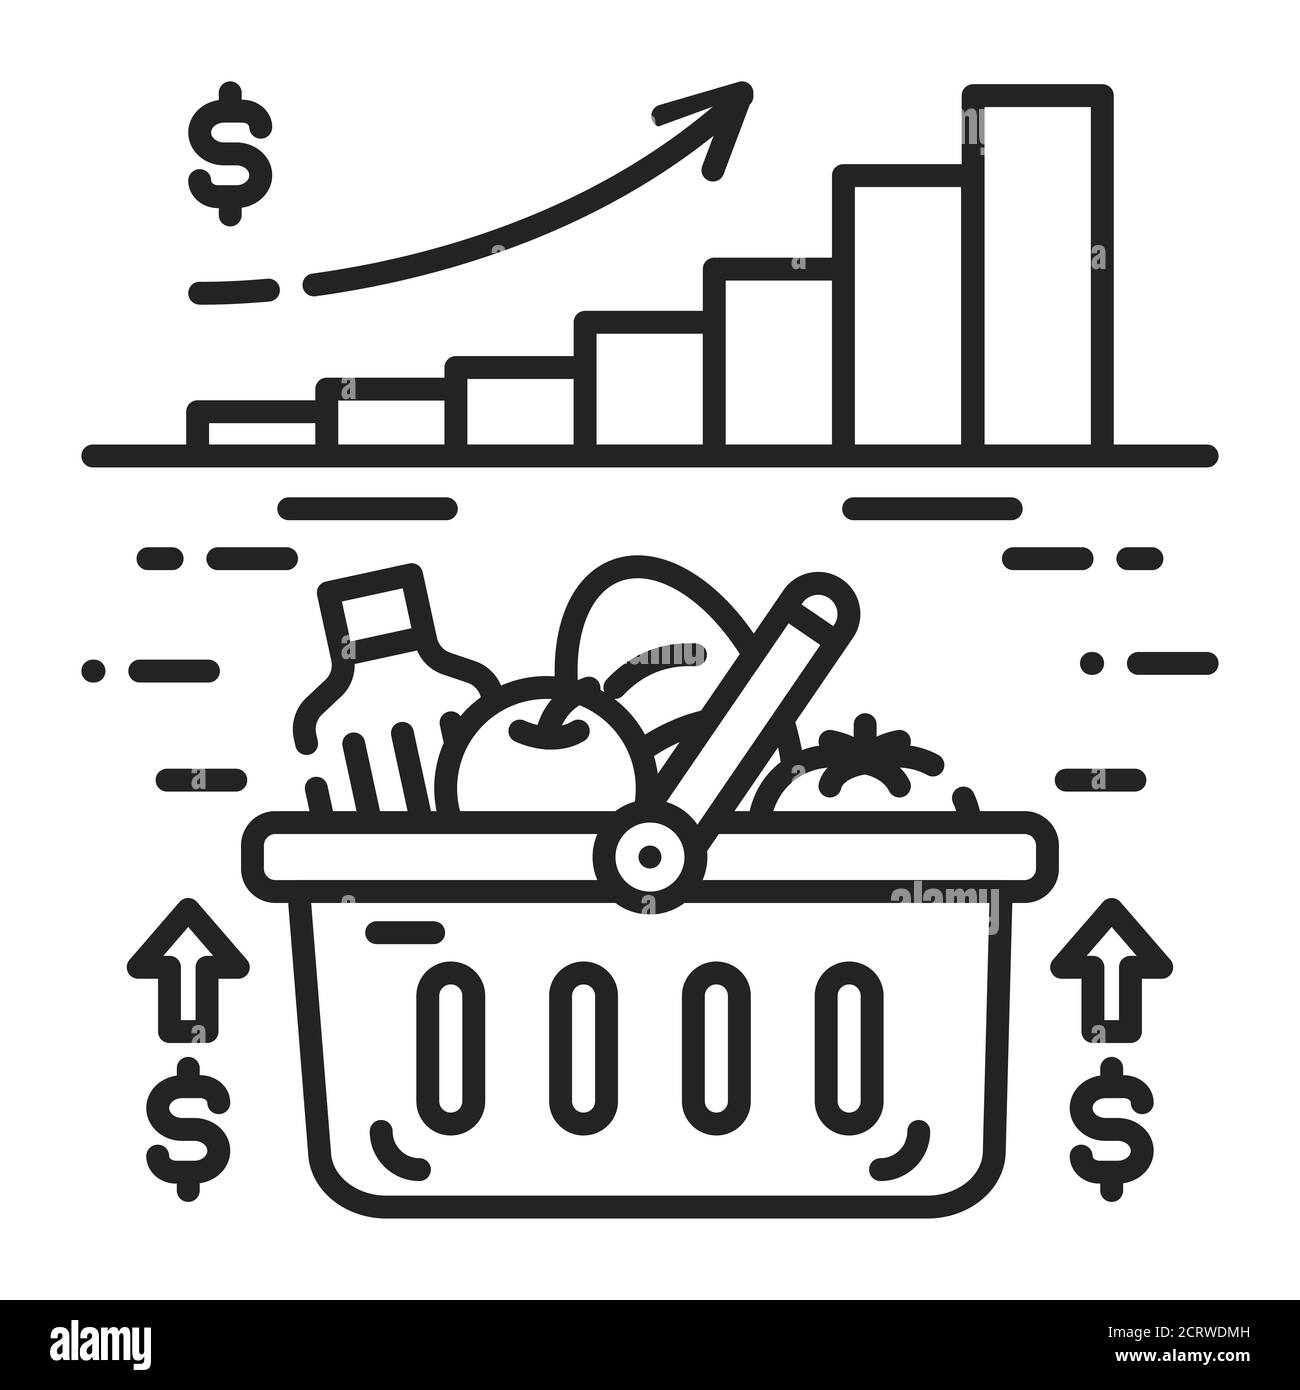 Expensive food basket black line icon. Rising food prices. Economic crisis. Sign for web page, app. UI UX GUI design element. Editable stroke. Stock Photo